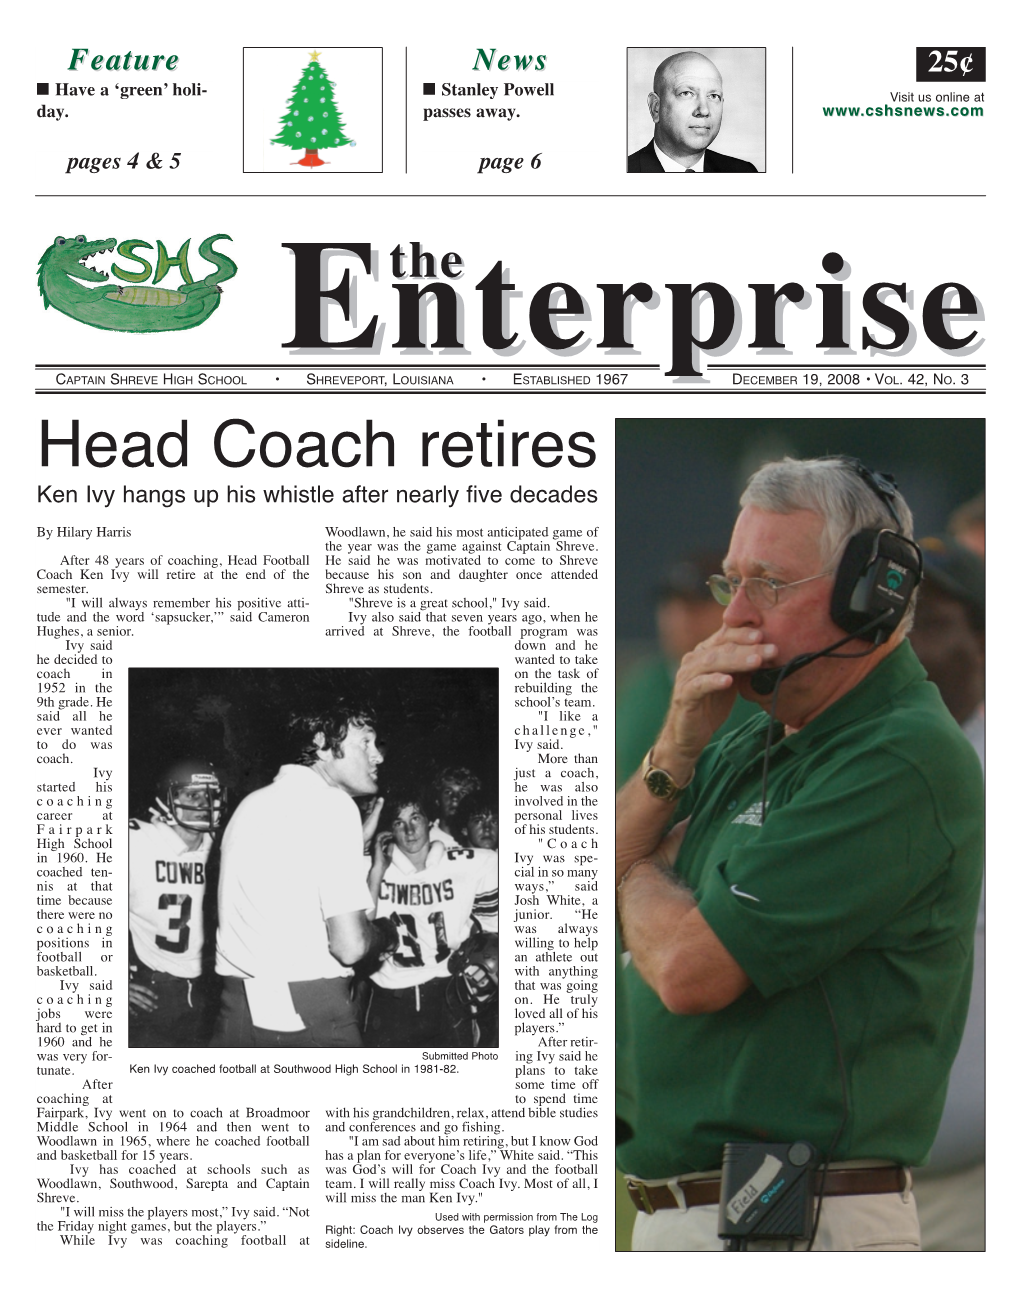 Head Coach Retires Ken Ivy Hangs up His Whistle After Nearly Five Decades